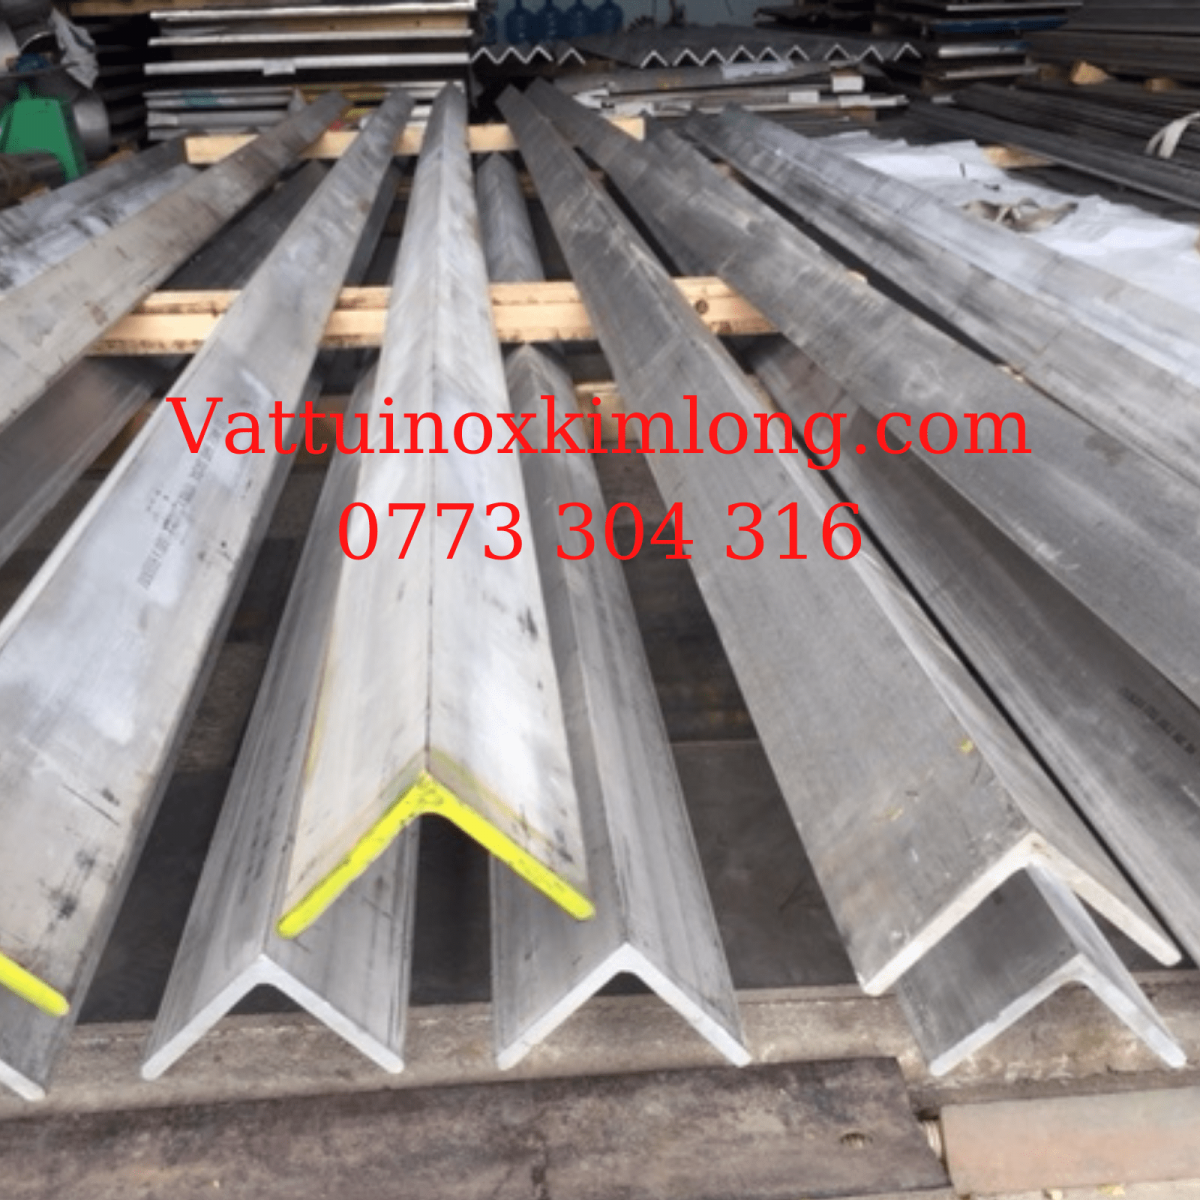 Supply stainless steel materials, angel 304, 316 , good price, China, india